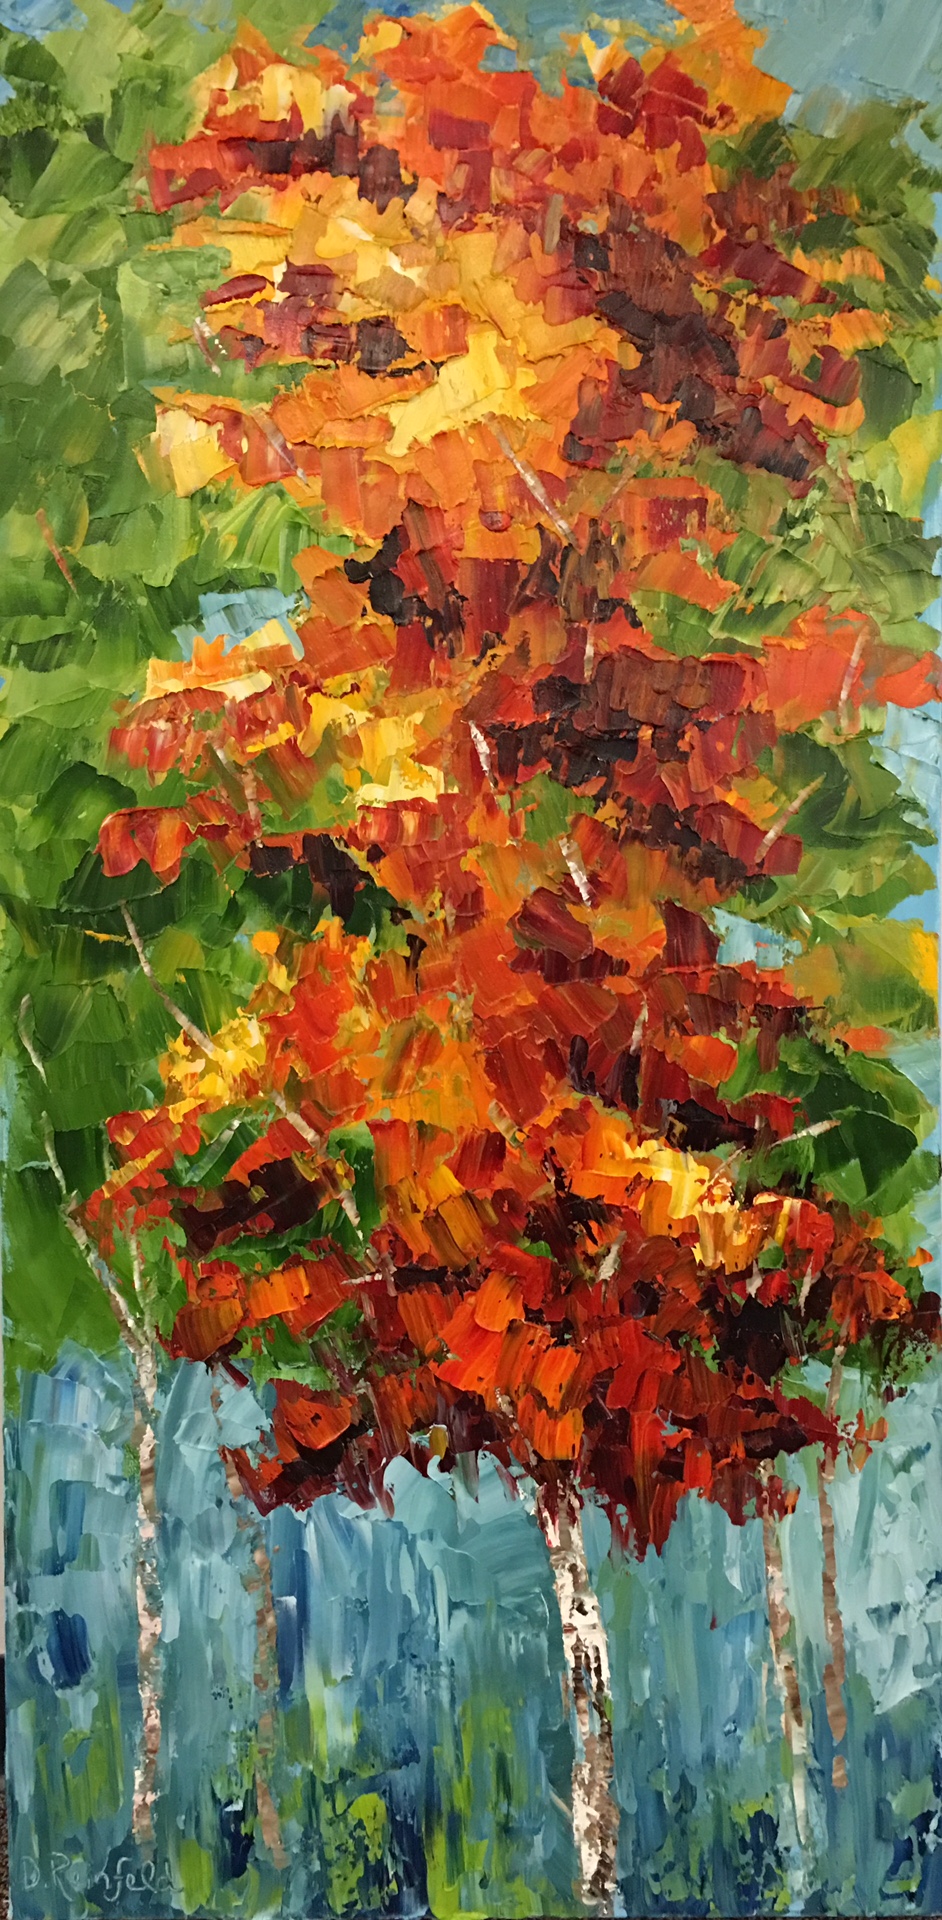 Be You, oil on canvas, 48"x24" SOLD